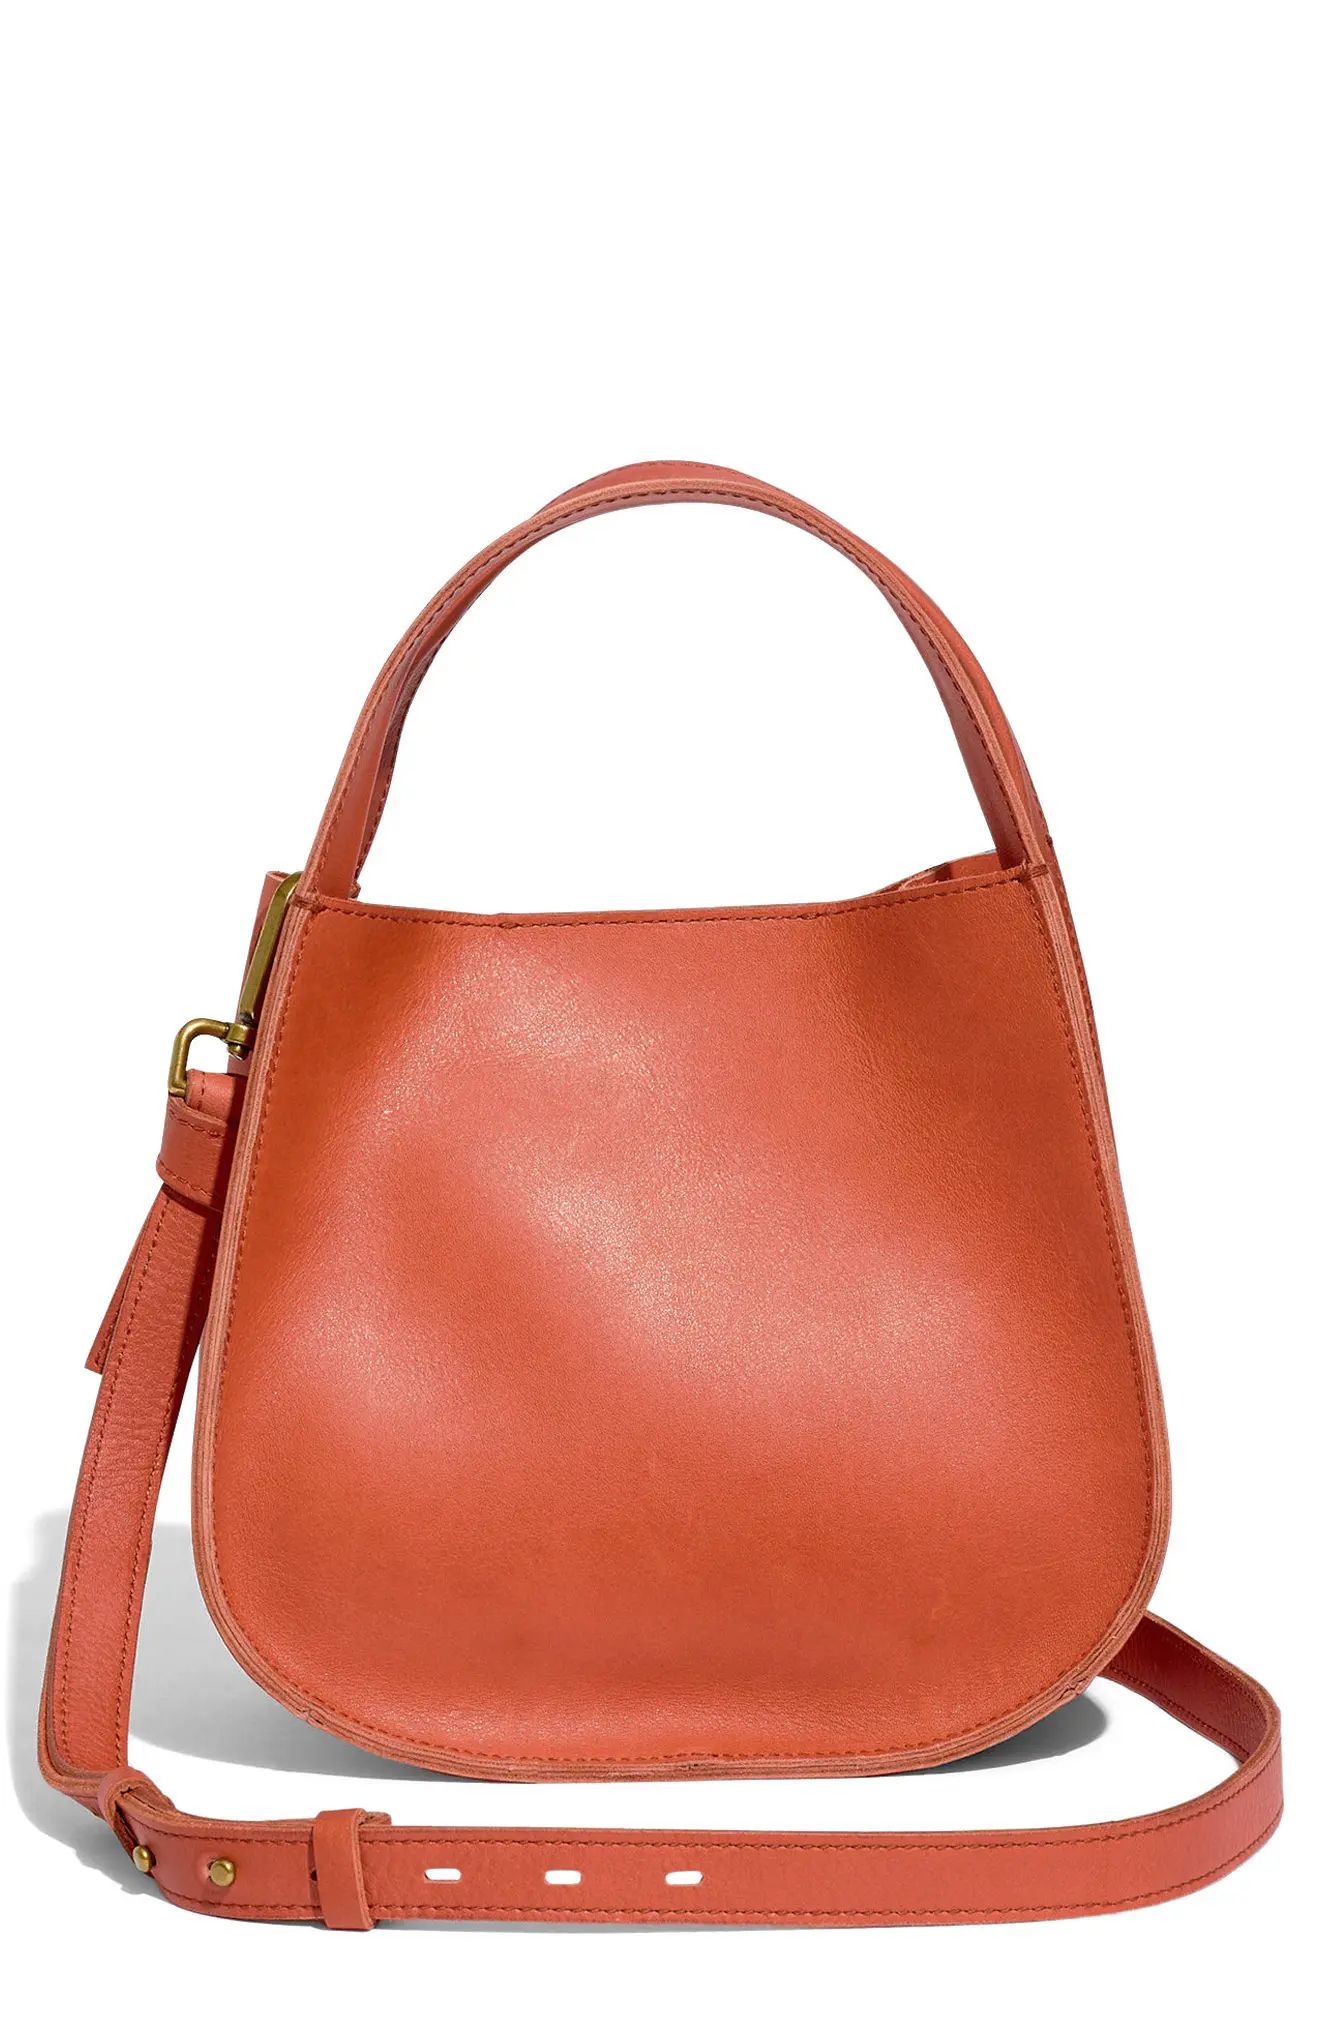 Madewell The Sydney Crossbody Bag in Fresh Chili at Nordstrom | Nordstrom